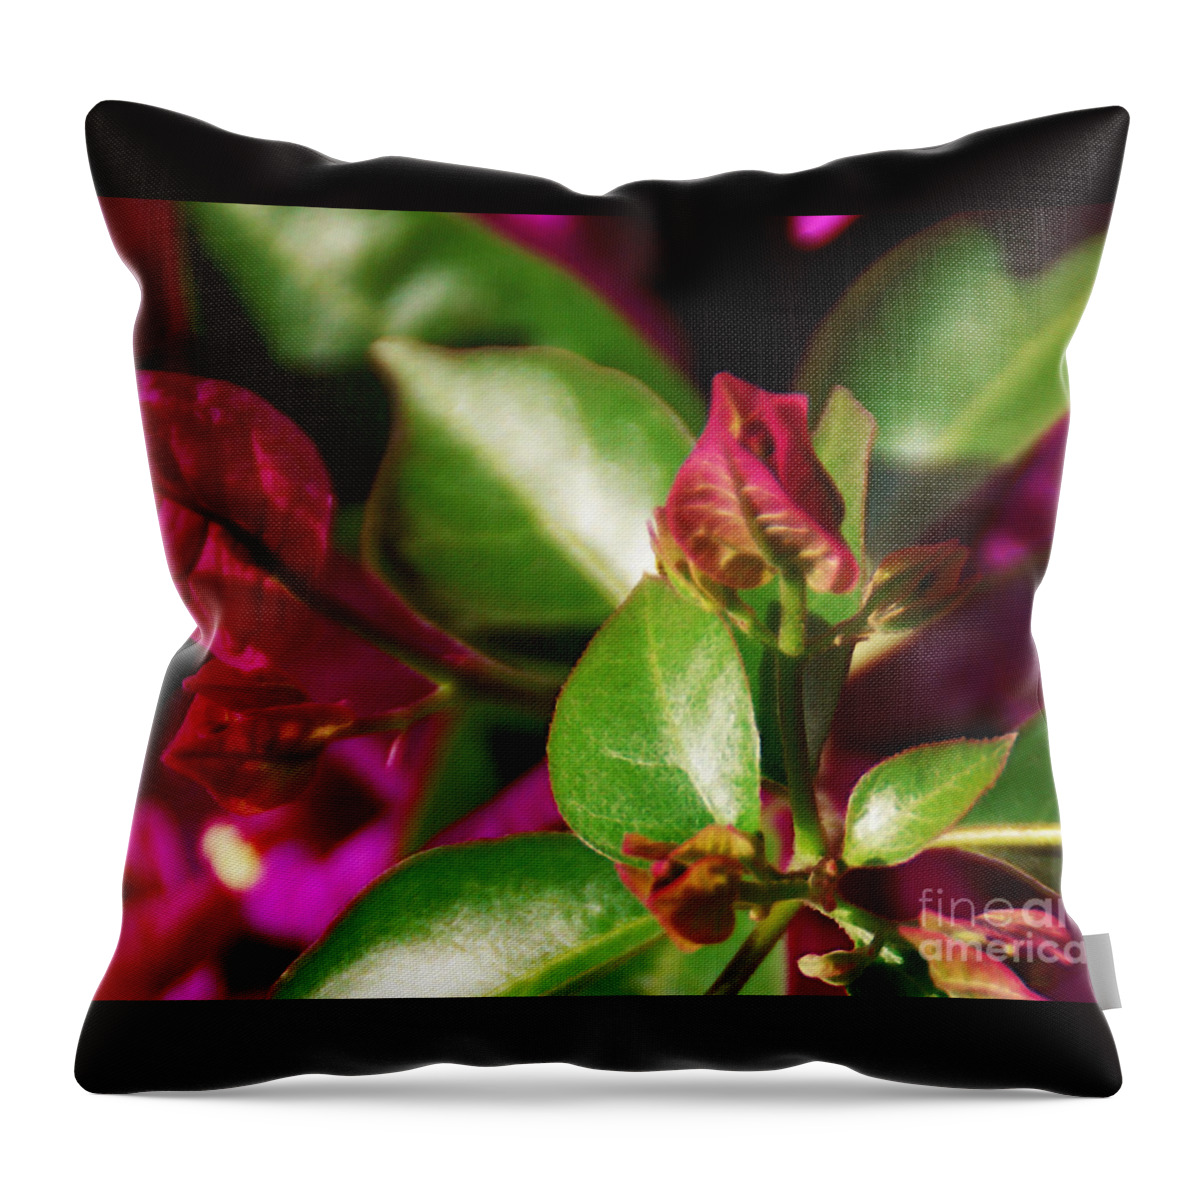 Bougainvillea Throw Pillow featuring the photograph Bougainvillea by Linda Shafer